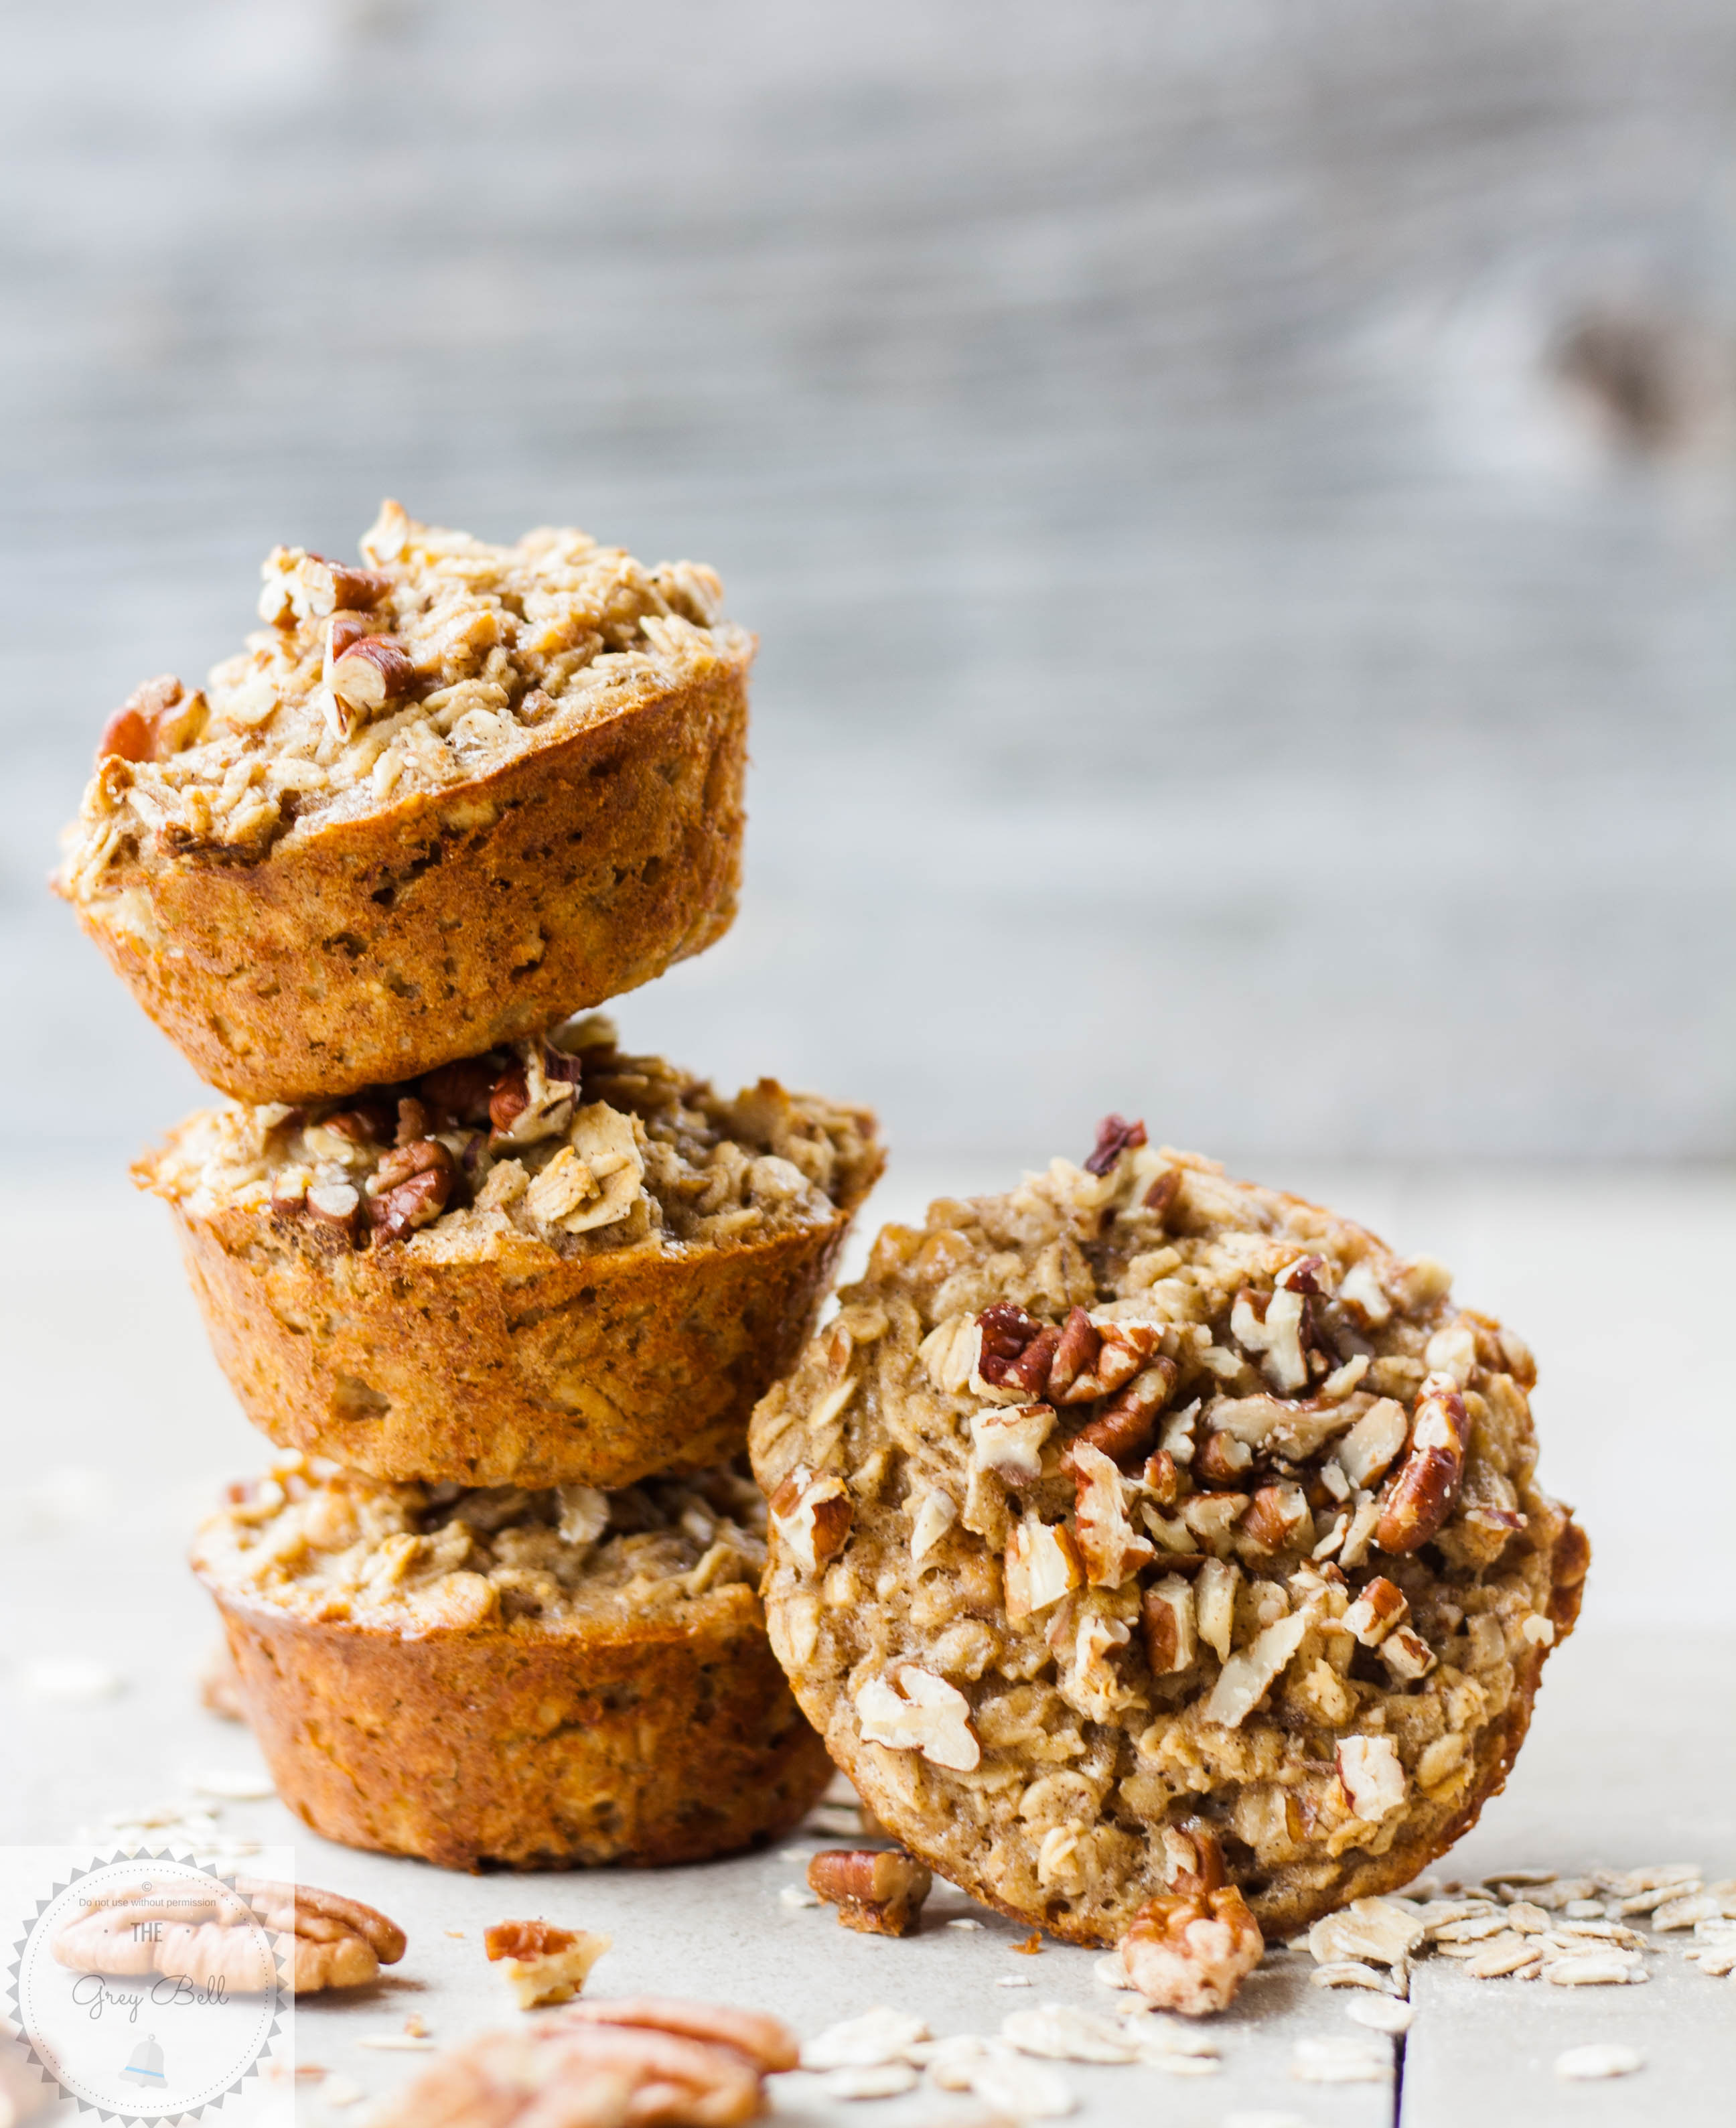 DIY banana peanut butter oatmeal cups with protein